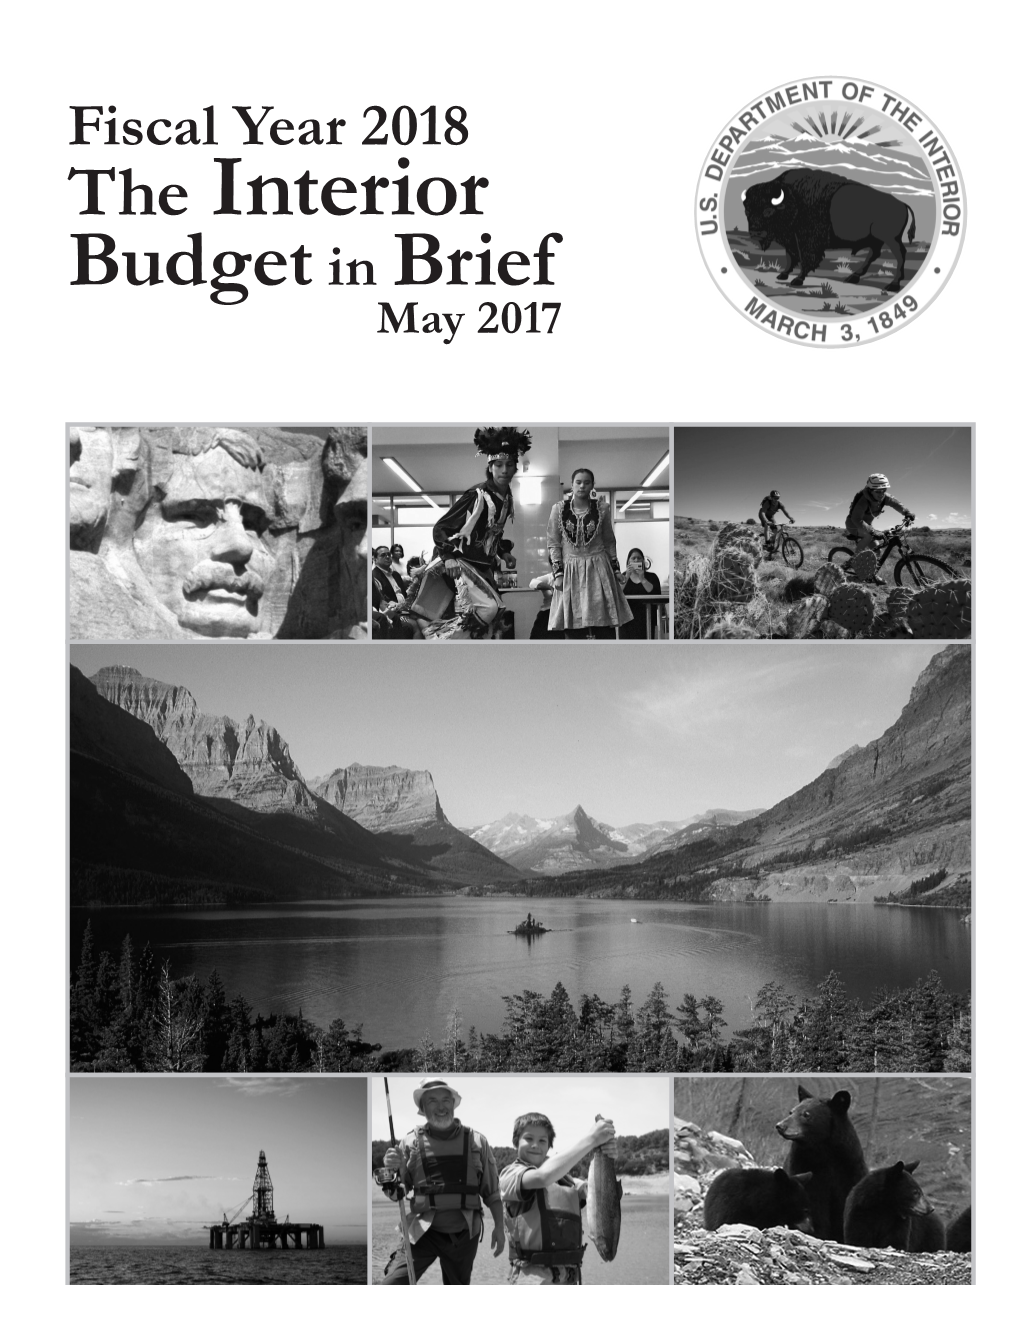 The Interior Budget in Brief May 2017